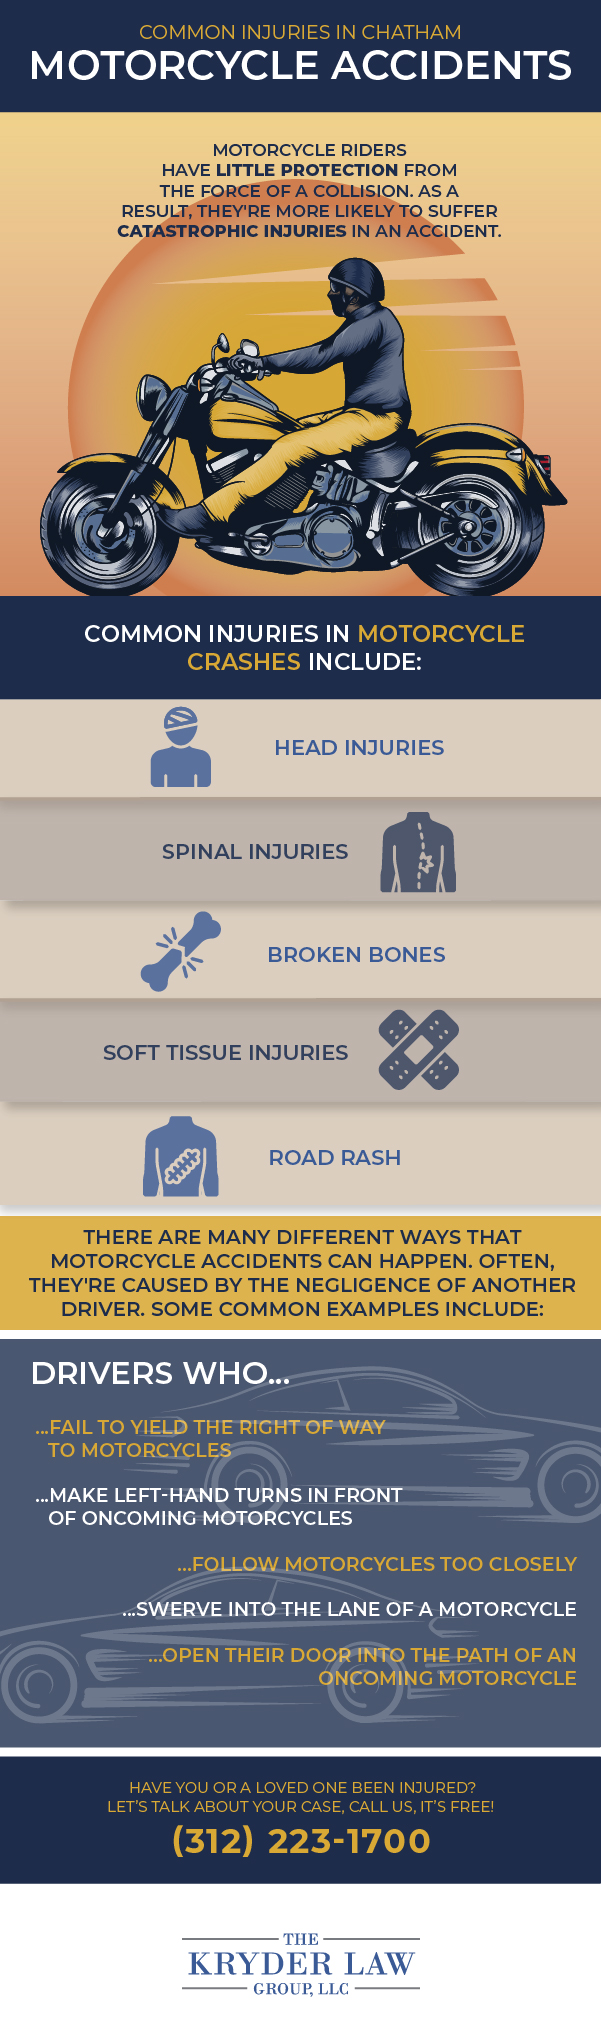 Chatham Motorcycle Accident Lawyer Infographic